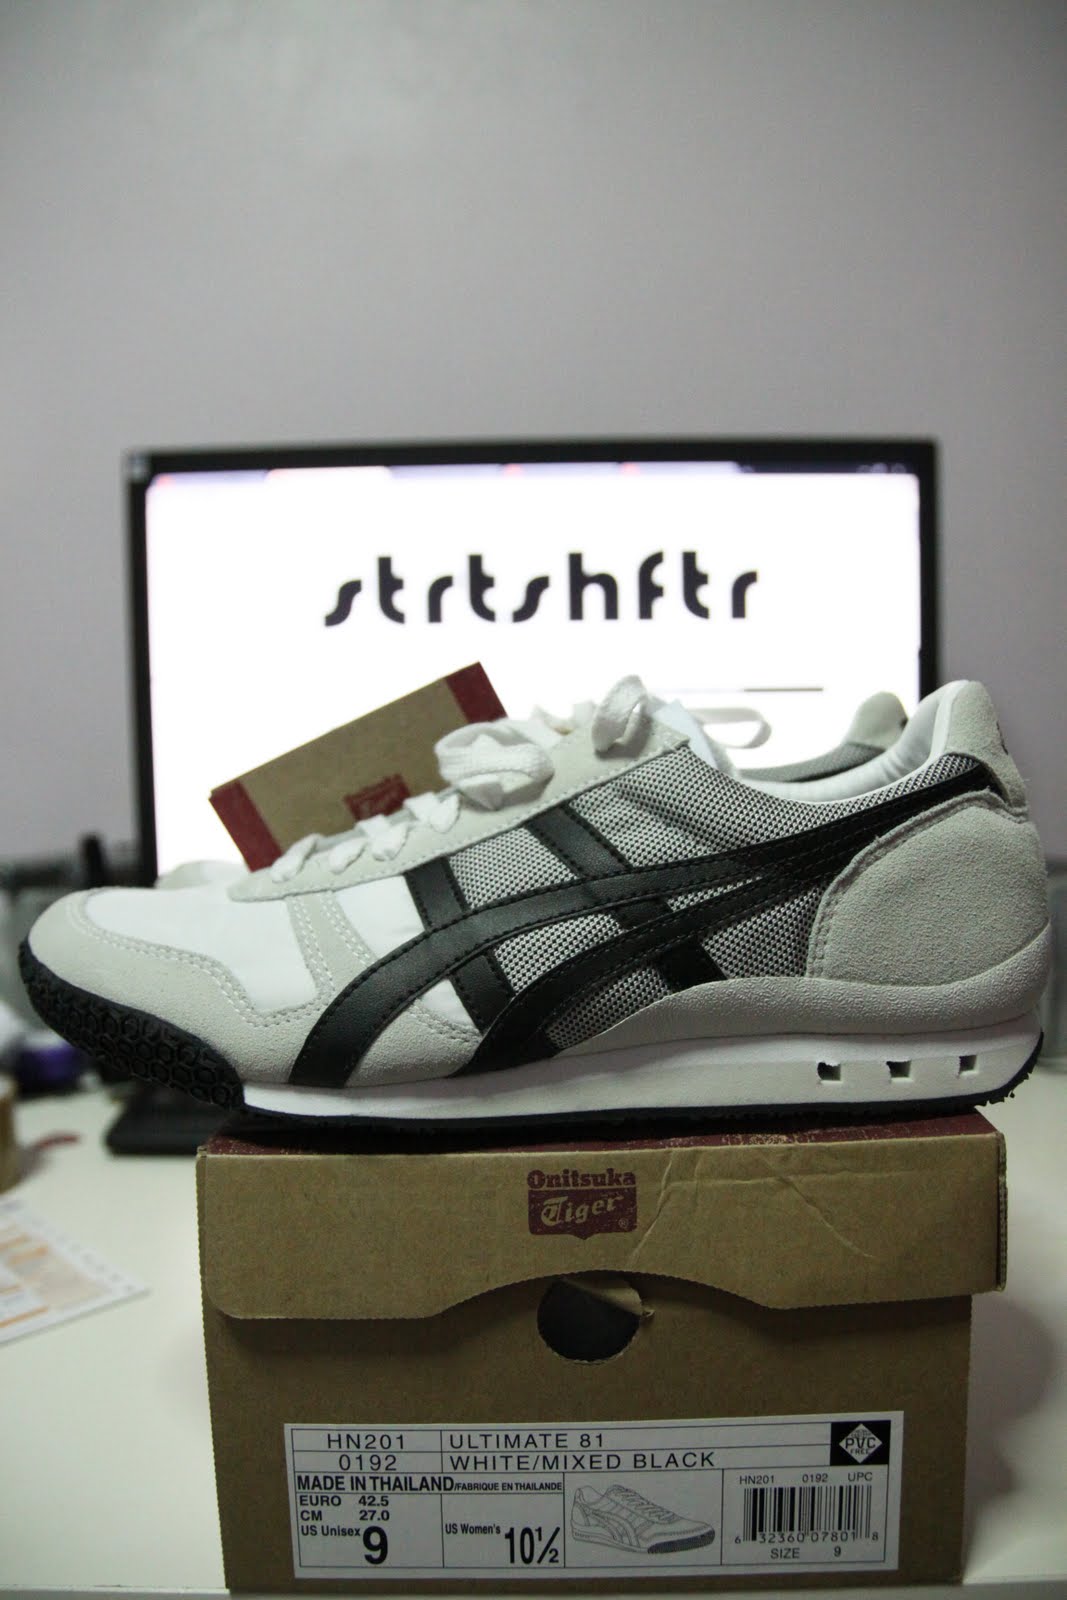 Street Shifters.: [ Authentic ] Onitsuka Tiger Ultimate 81 White/Mixed ...